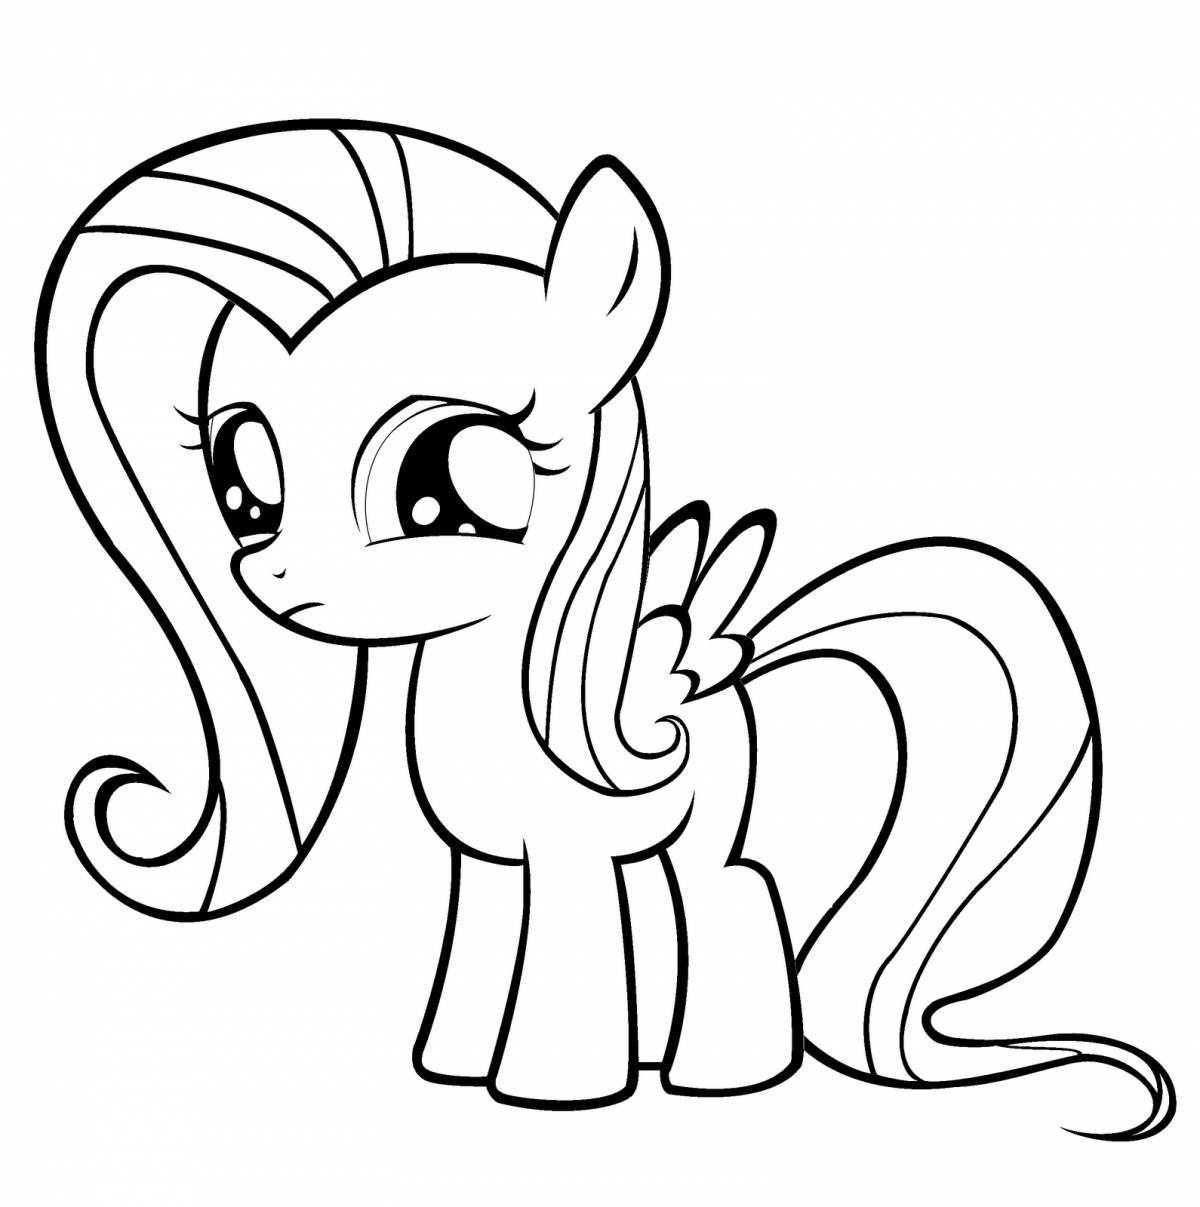 Coloring page dazzling pony for children 5-6 years old